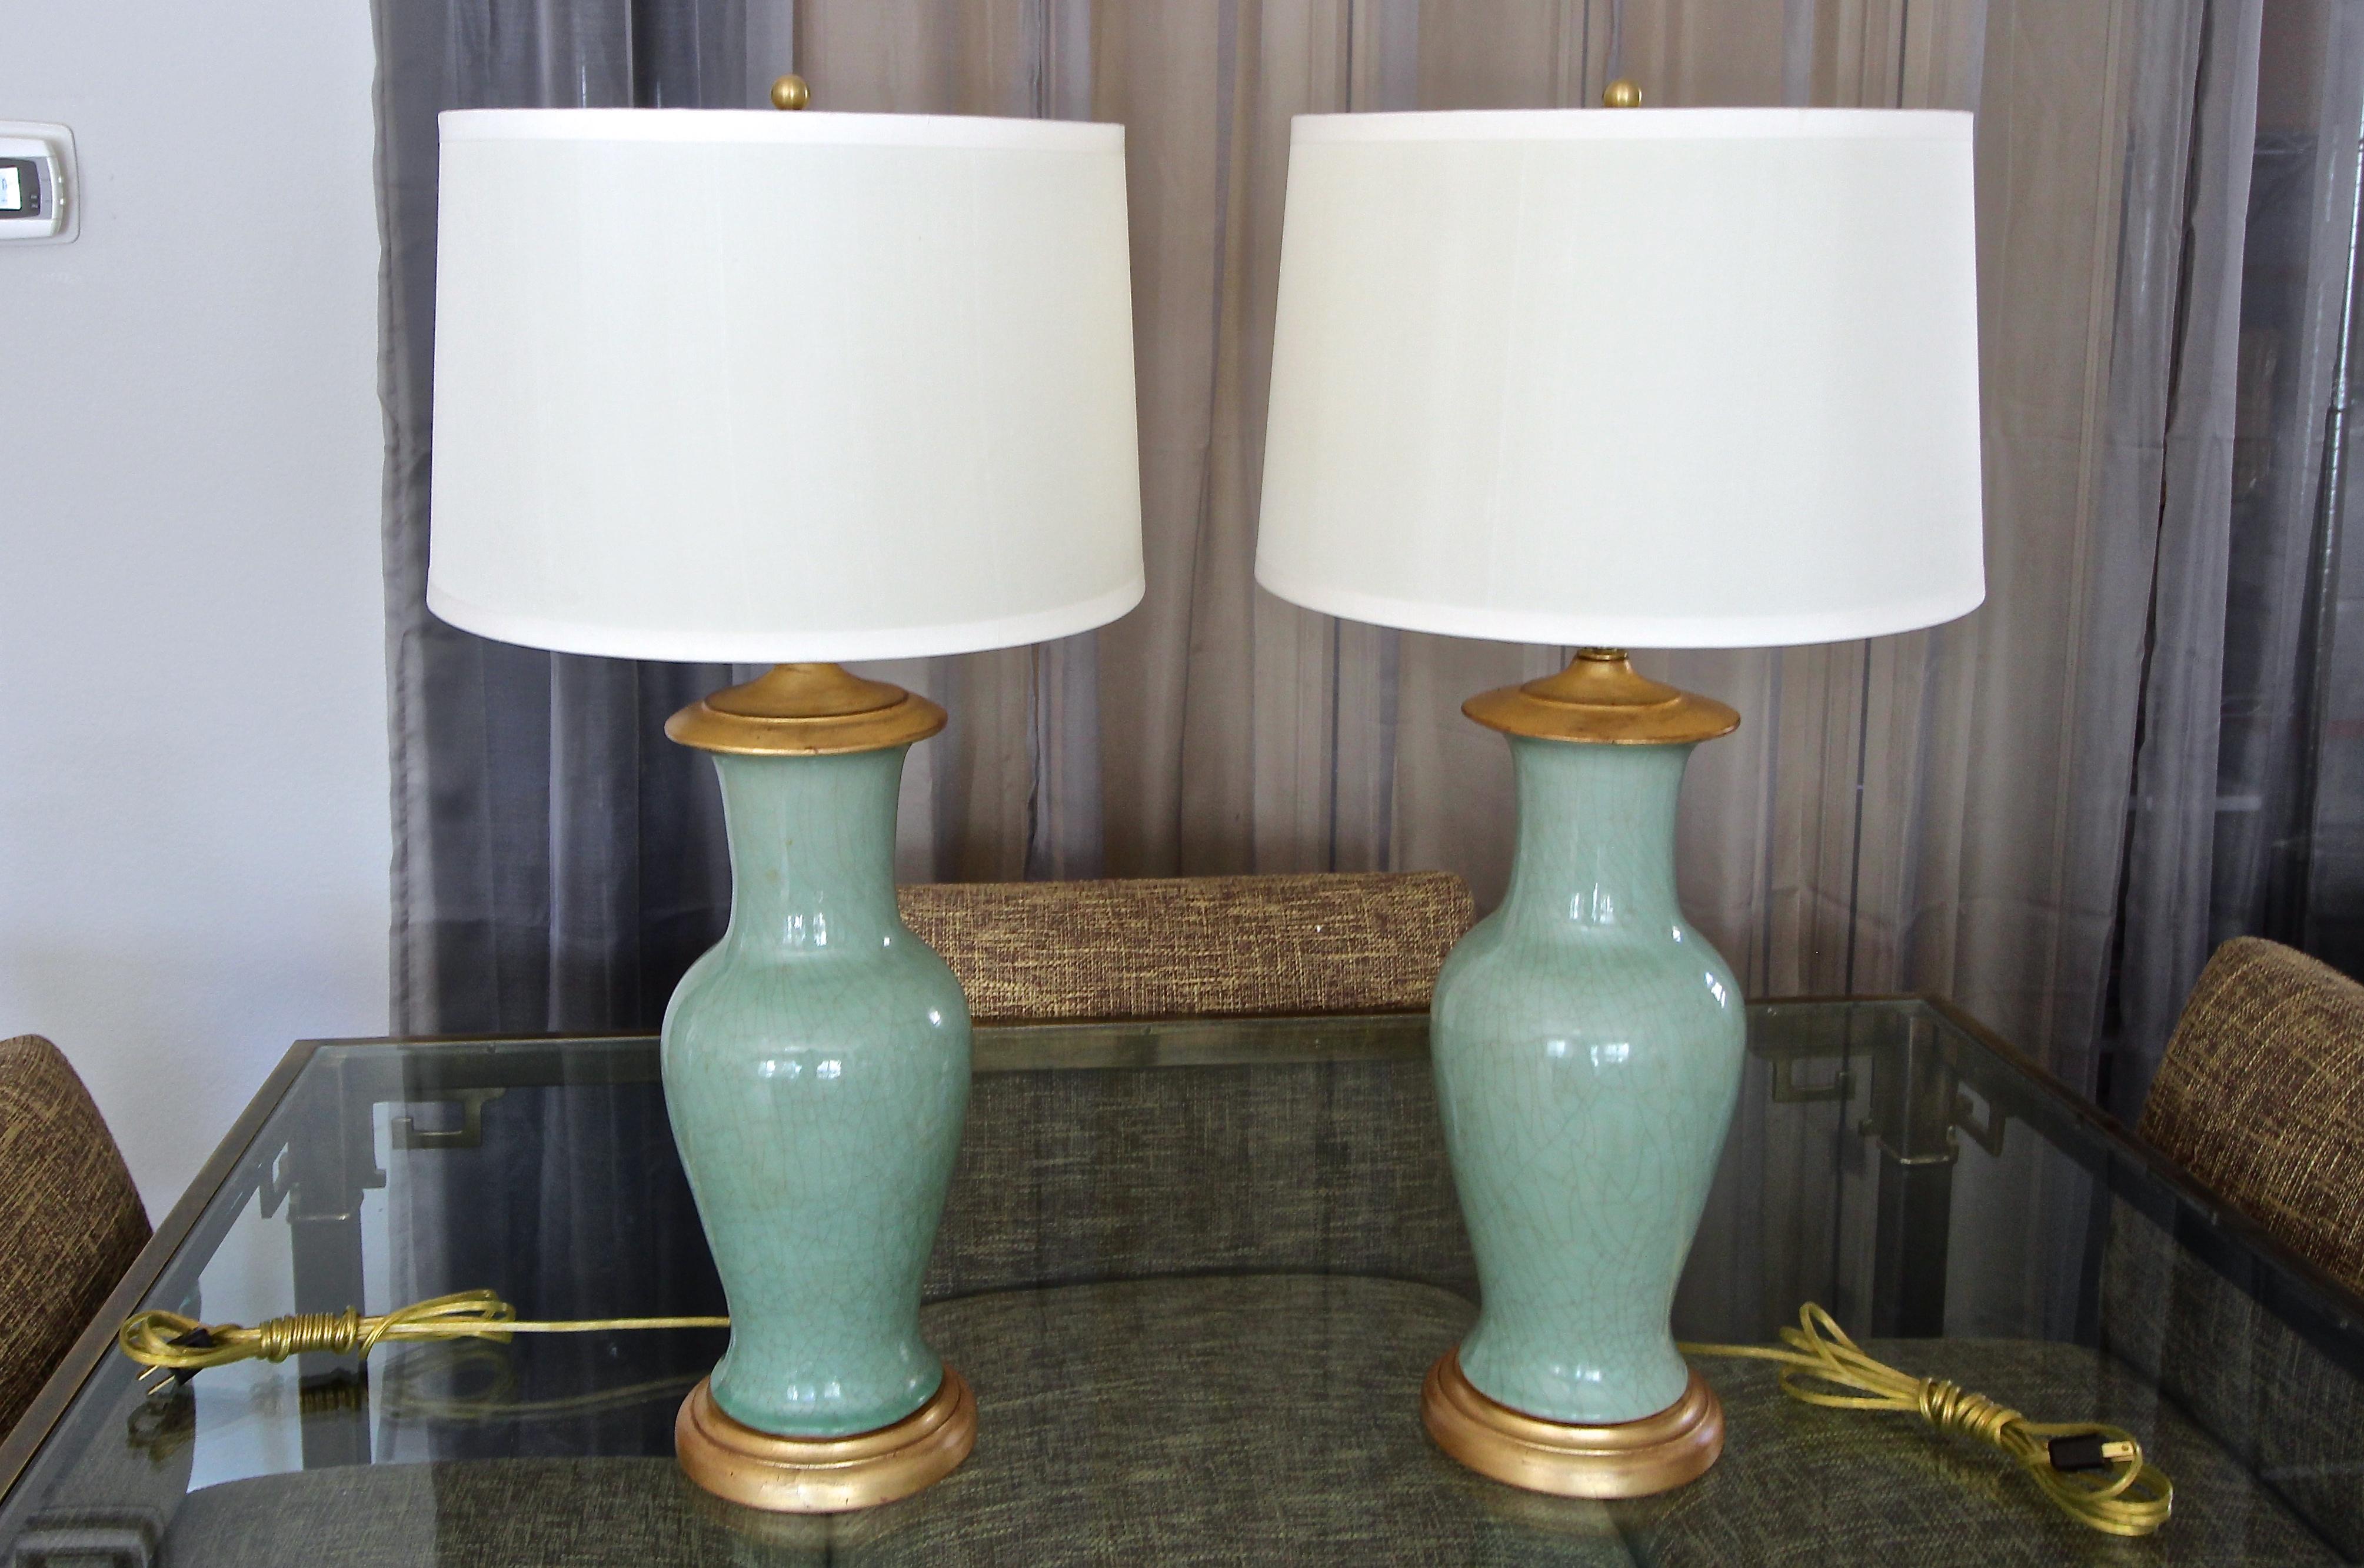 Pair of Asian celadon green crackle glaze porcelain baluster form vases table lamps. Each mounted on gilt turned wood lamp bases. Newly wired with new double cluster pull chain brass sockets. Porcelain vase portion is 16